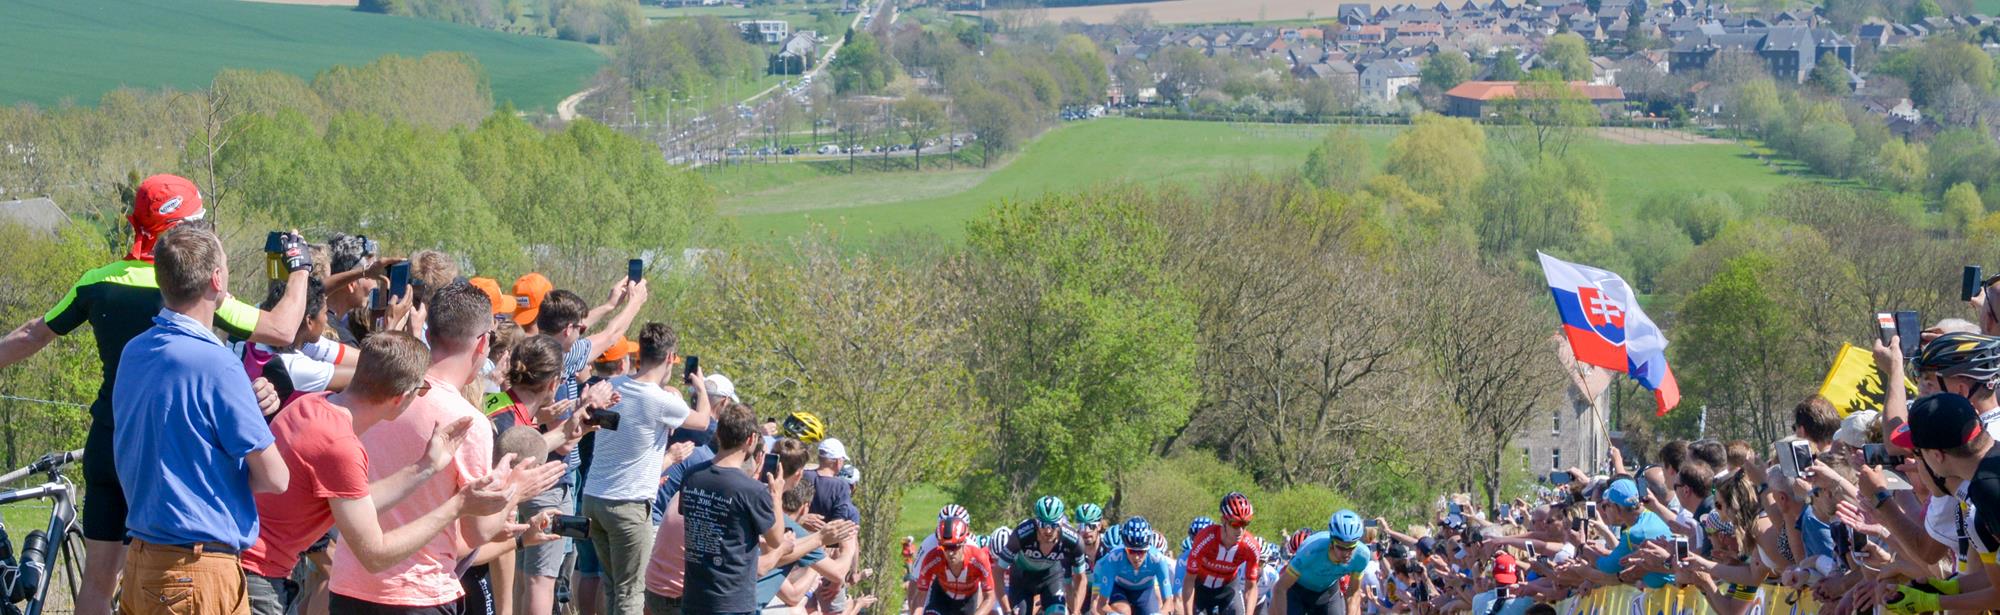 Amstel Gold Race Experience